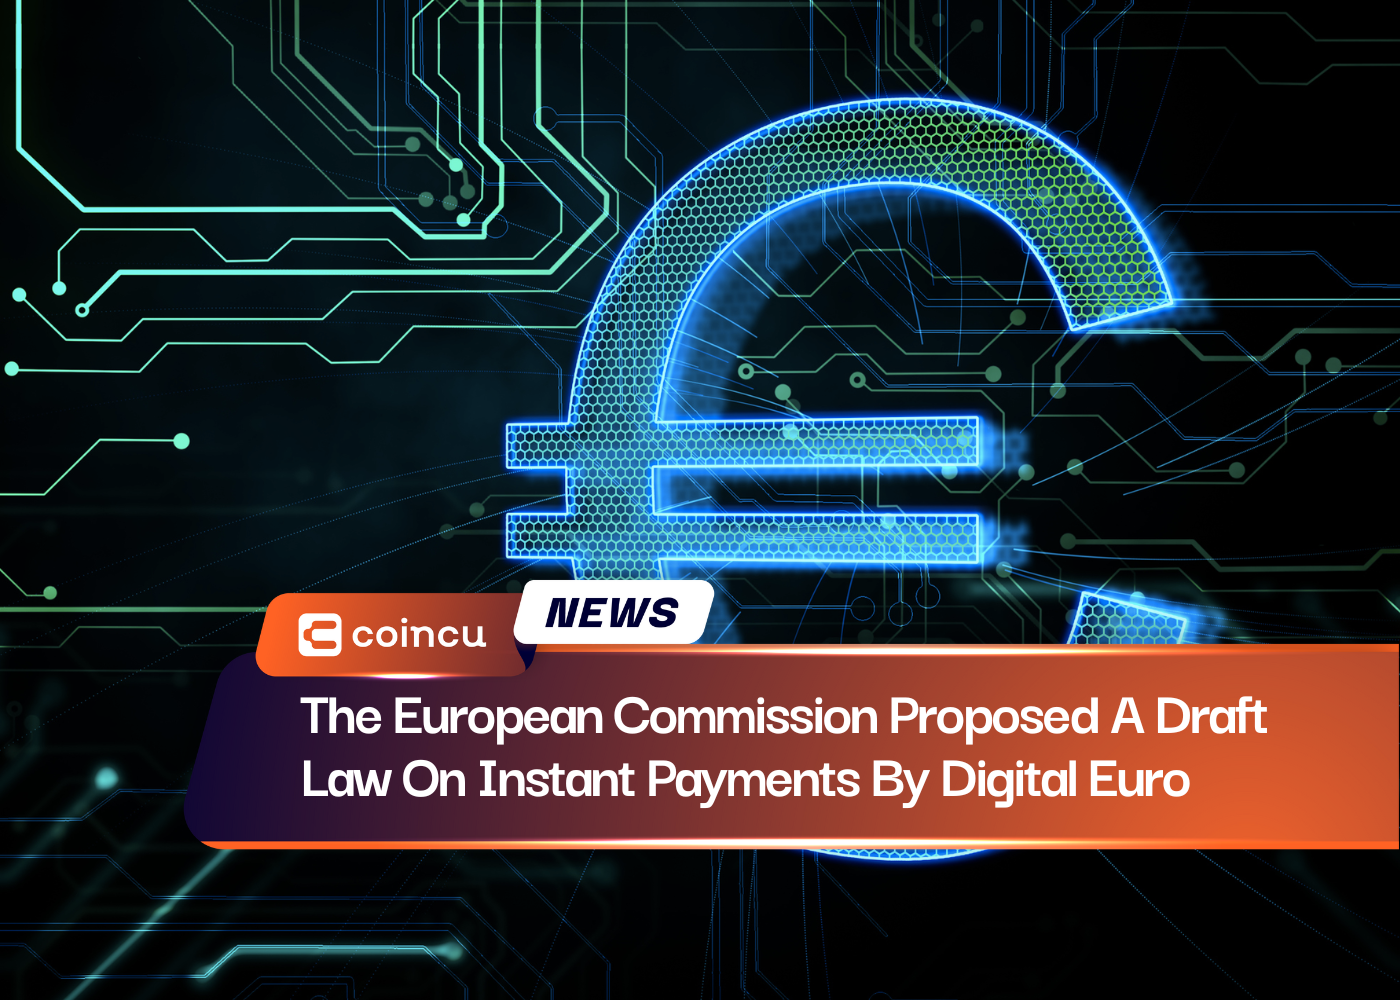 The European Commission Proposed A Draft Law On Instant Payments By Digital Euro